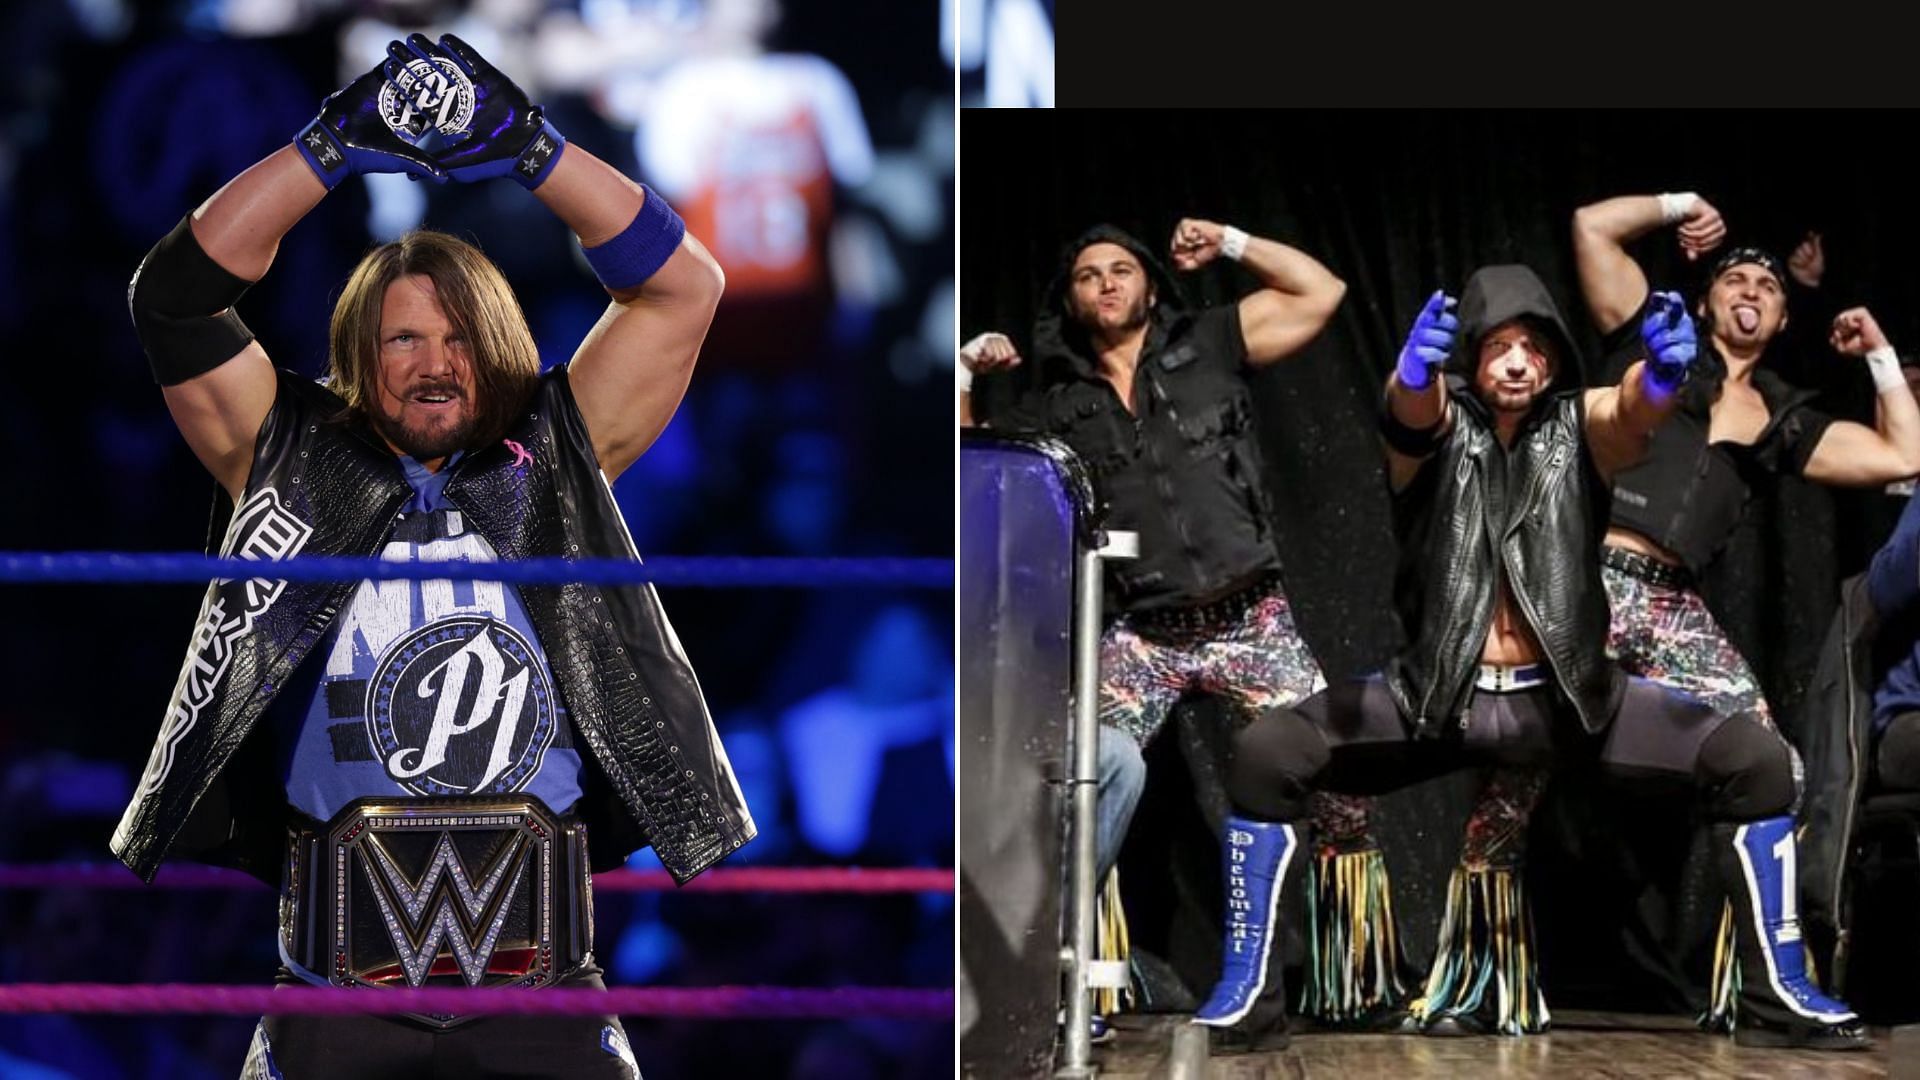 Will AJ Styles and the Young Bucks reunite?